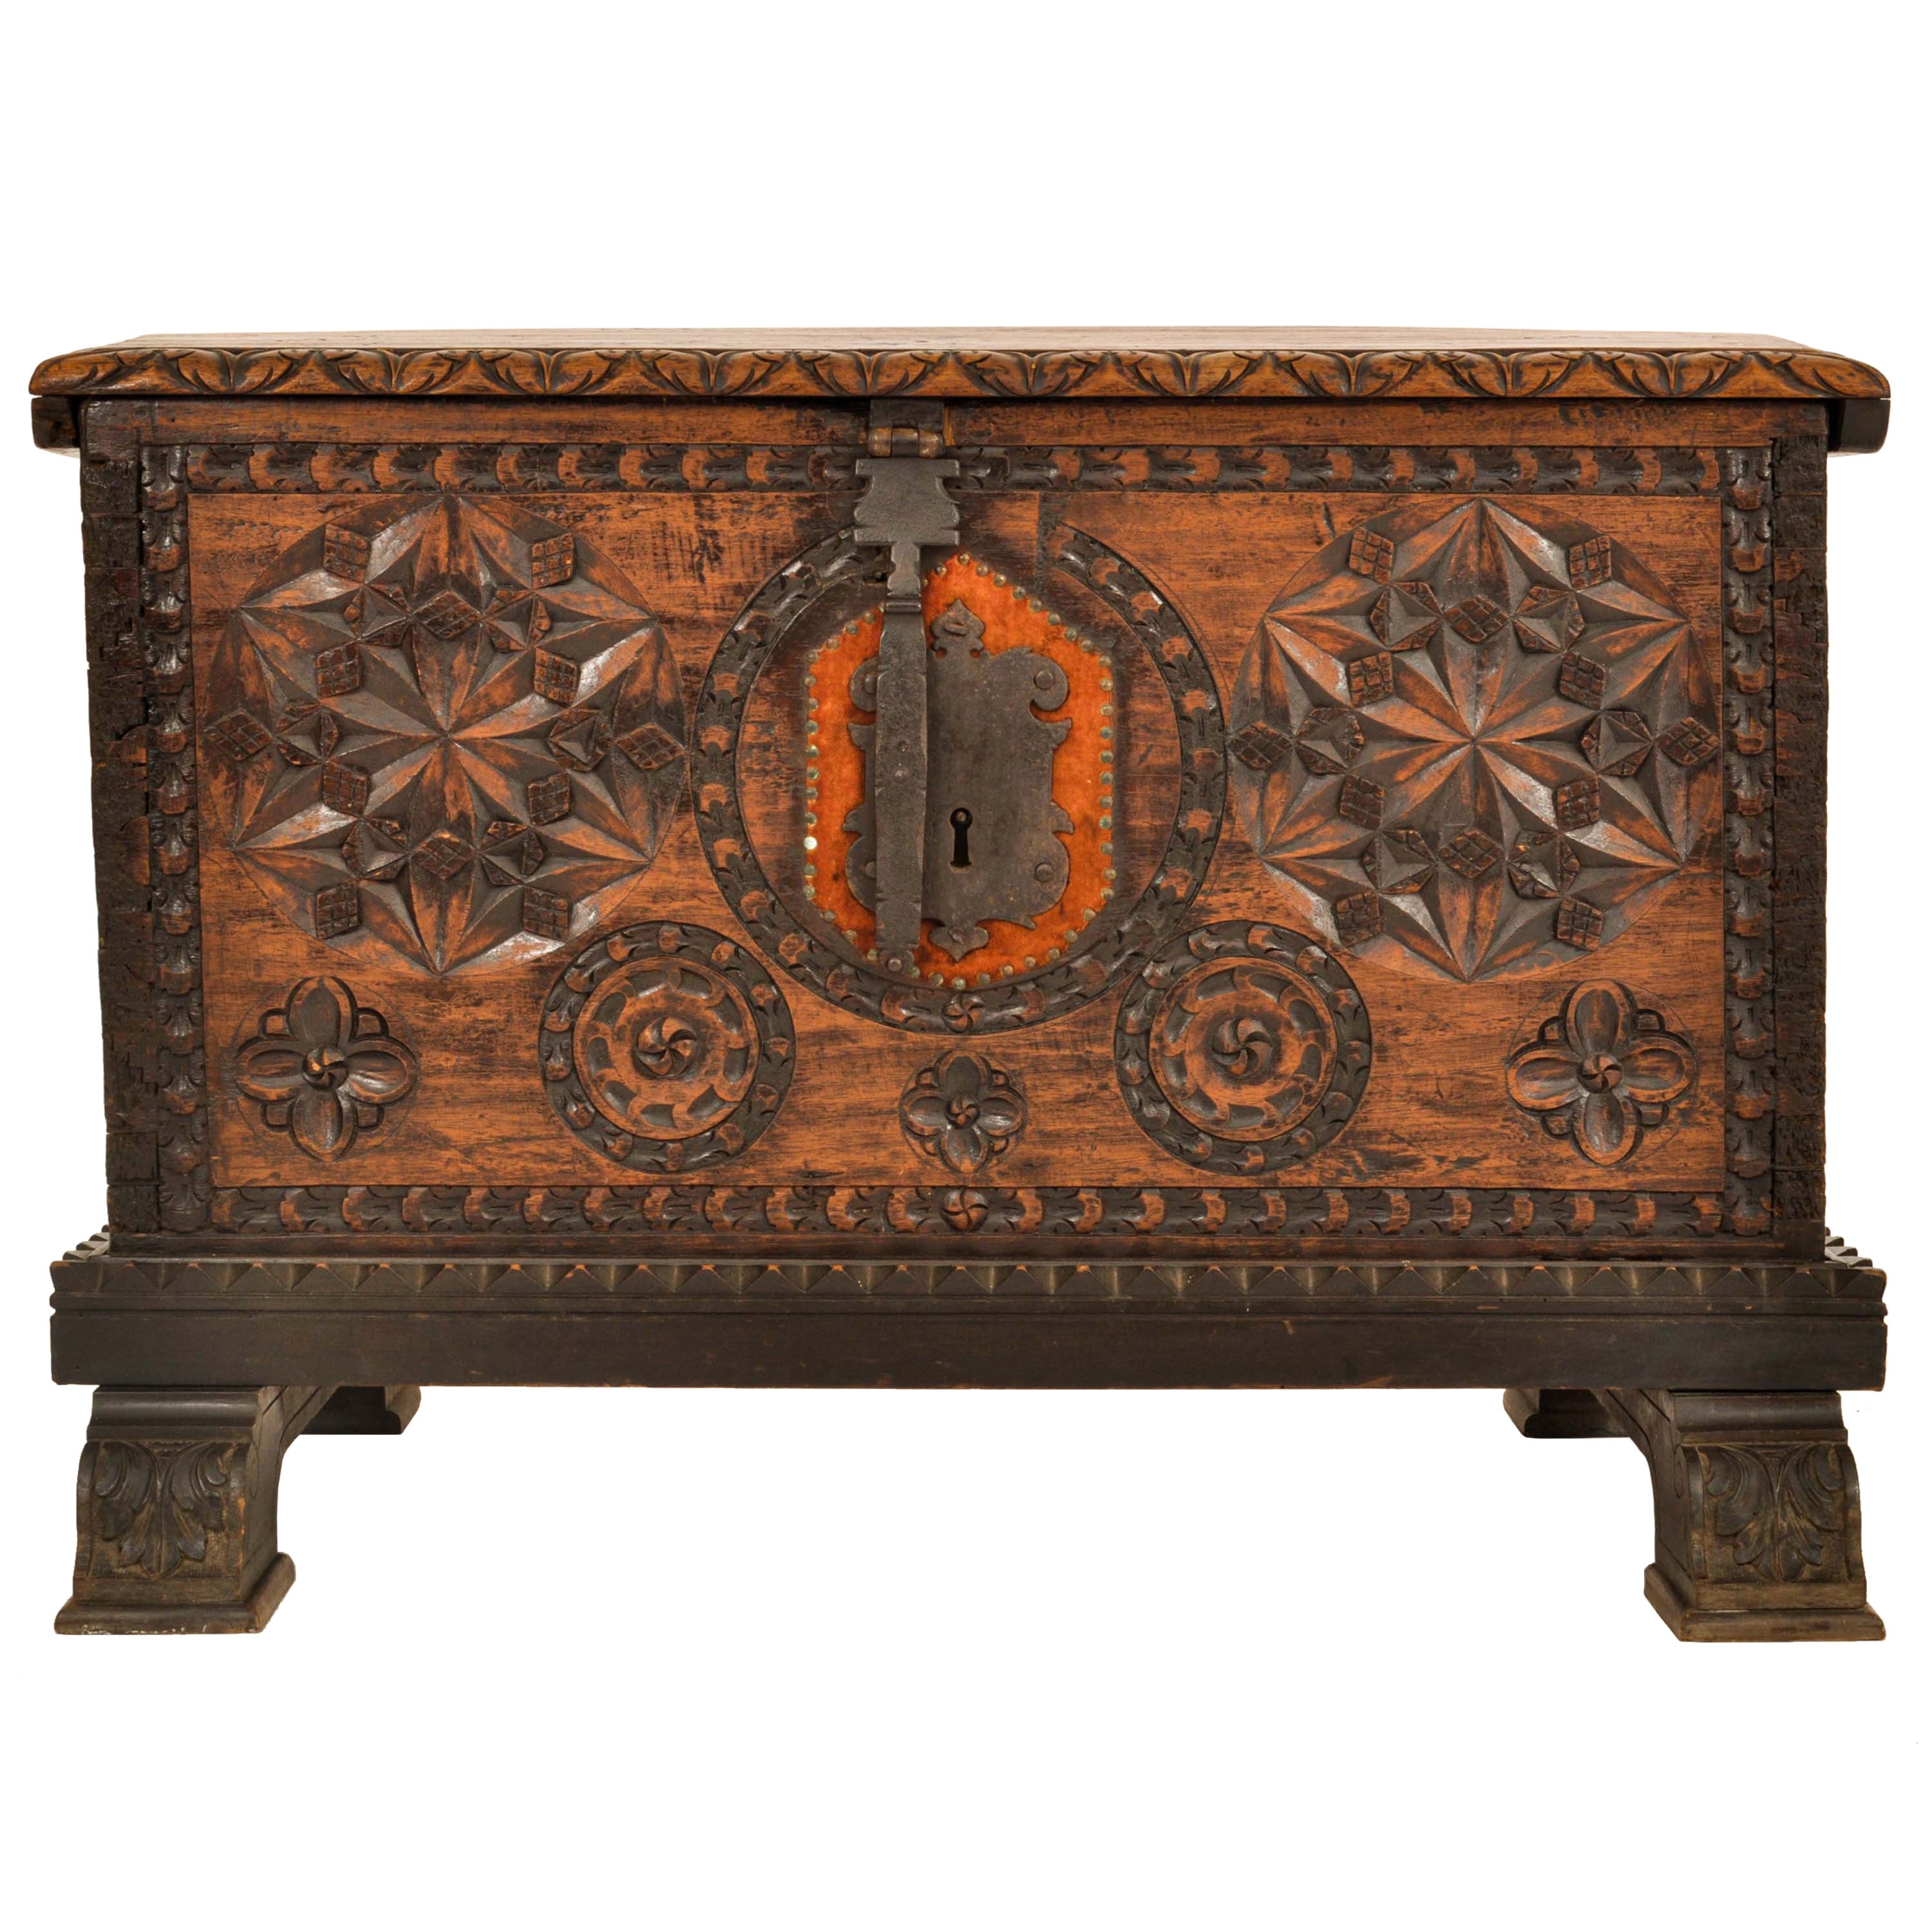 Antique Scandinavian Pine Baroque Folk Art Carved Dowry Chest Trunk Coffer 1780 For Sale